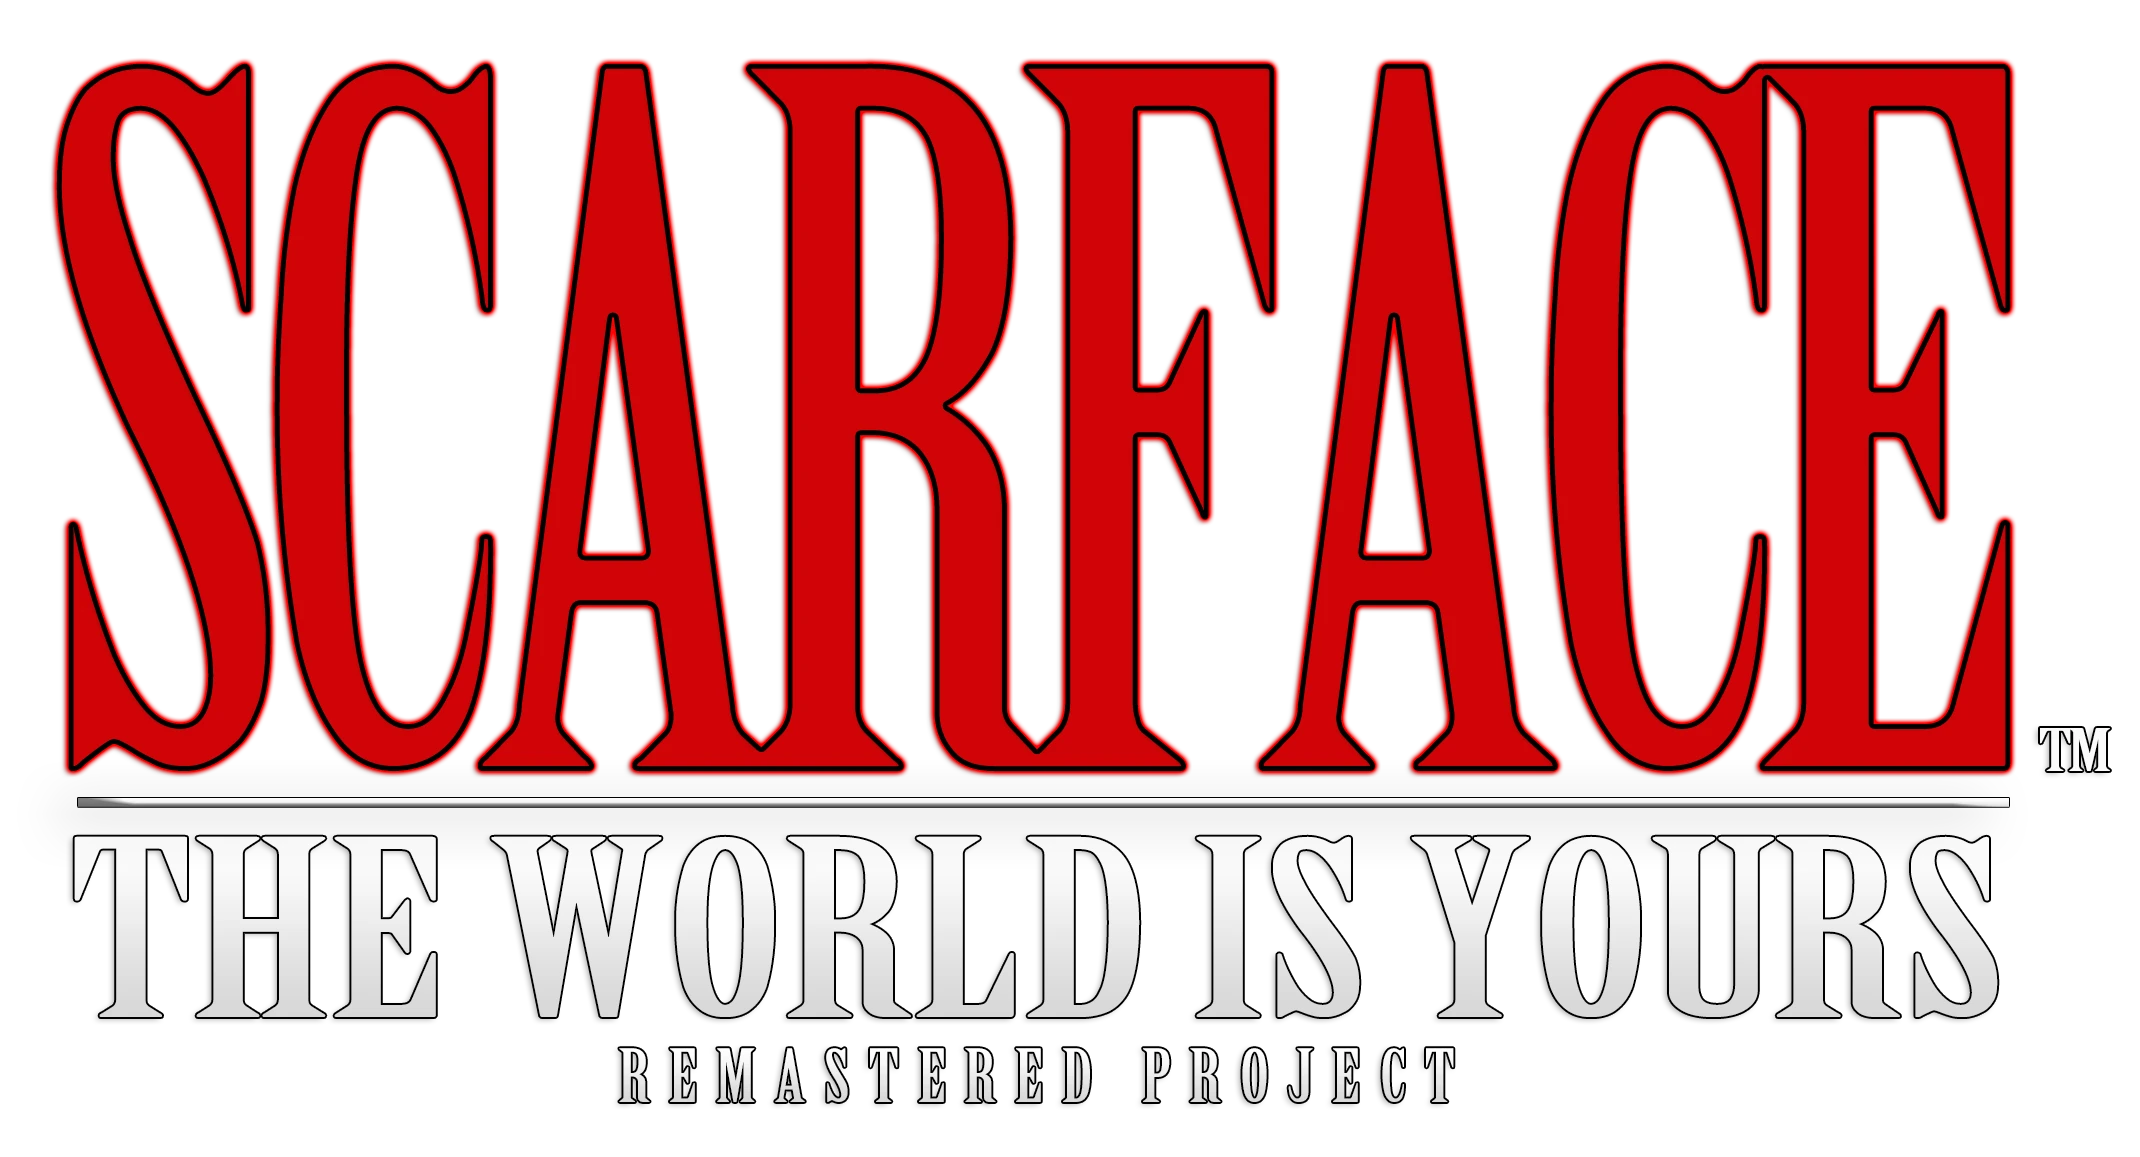 scarface the world is yours pc steam